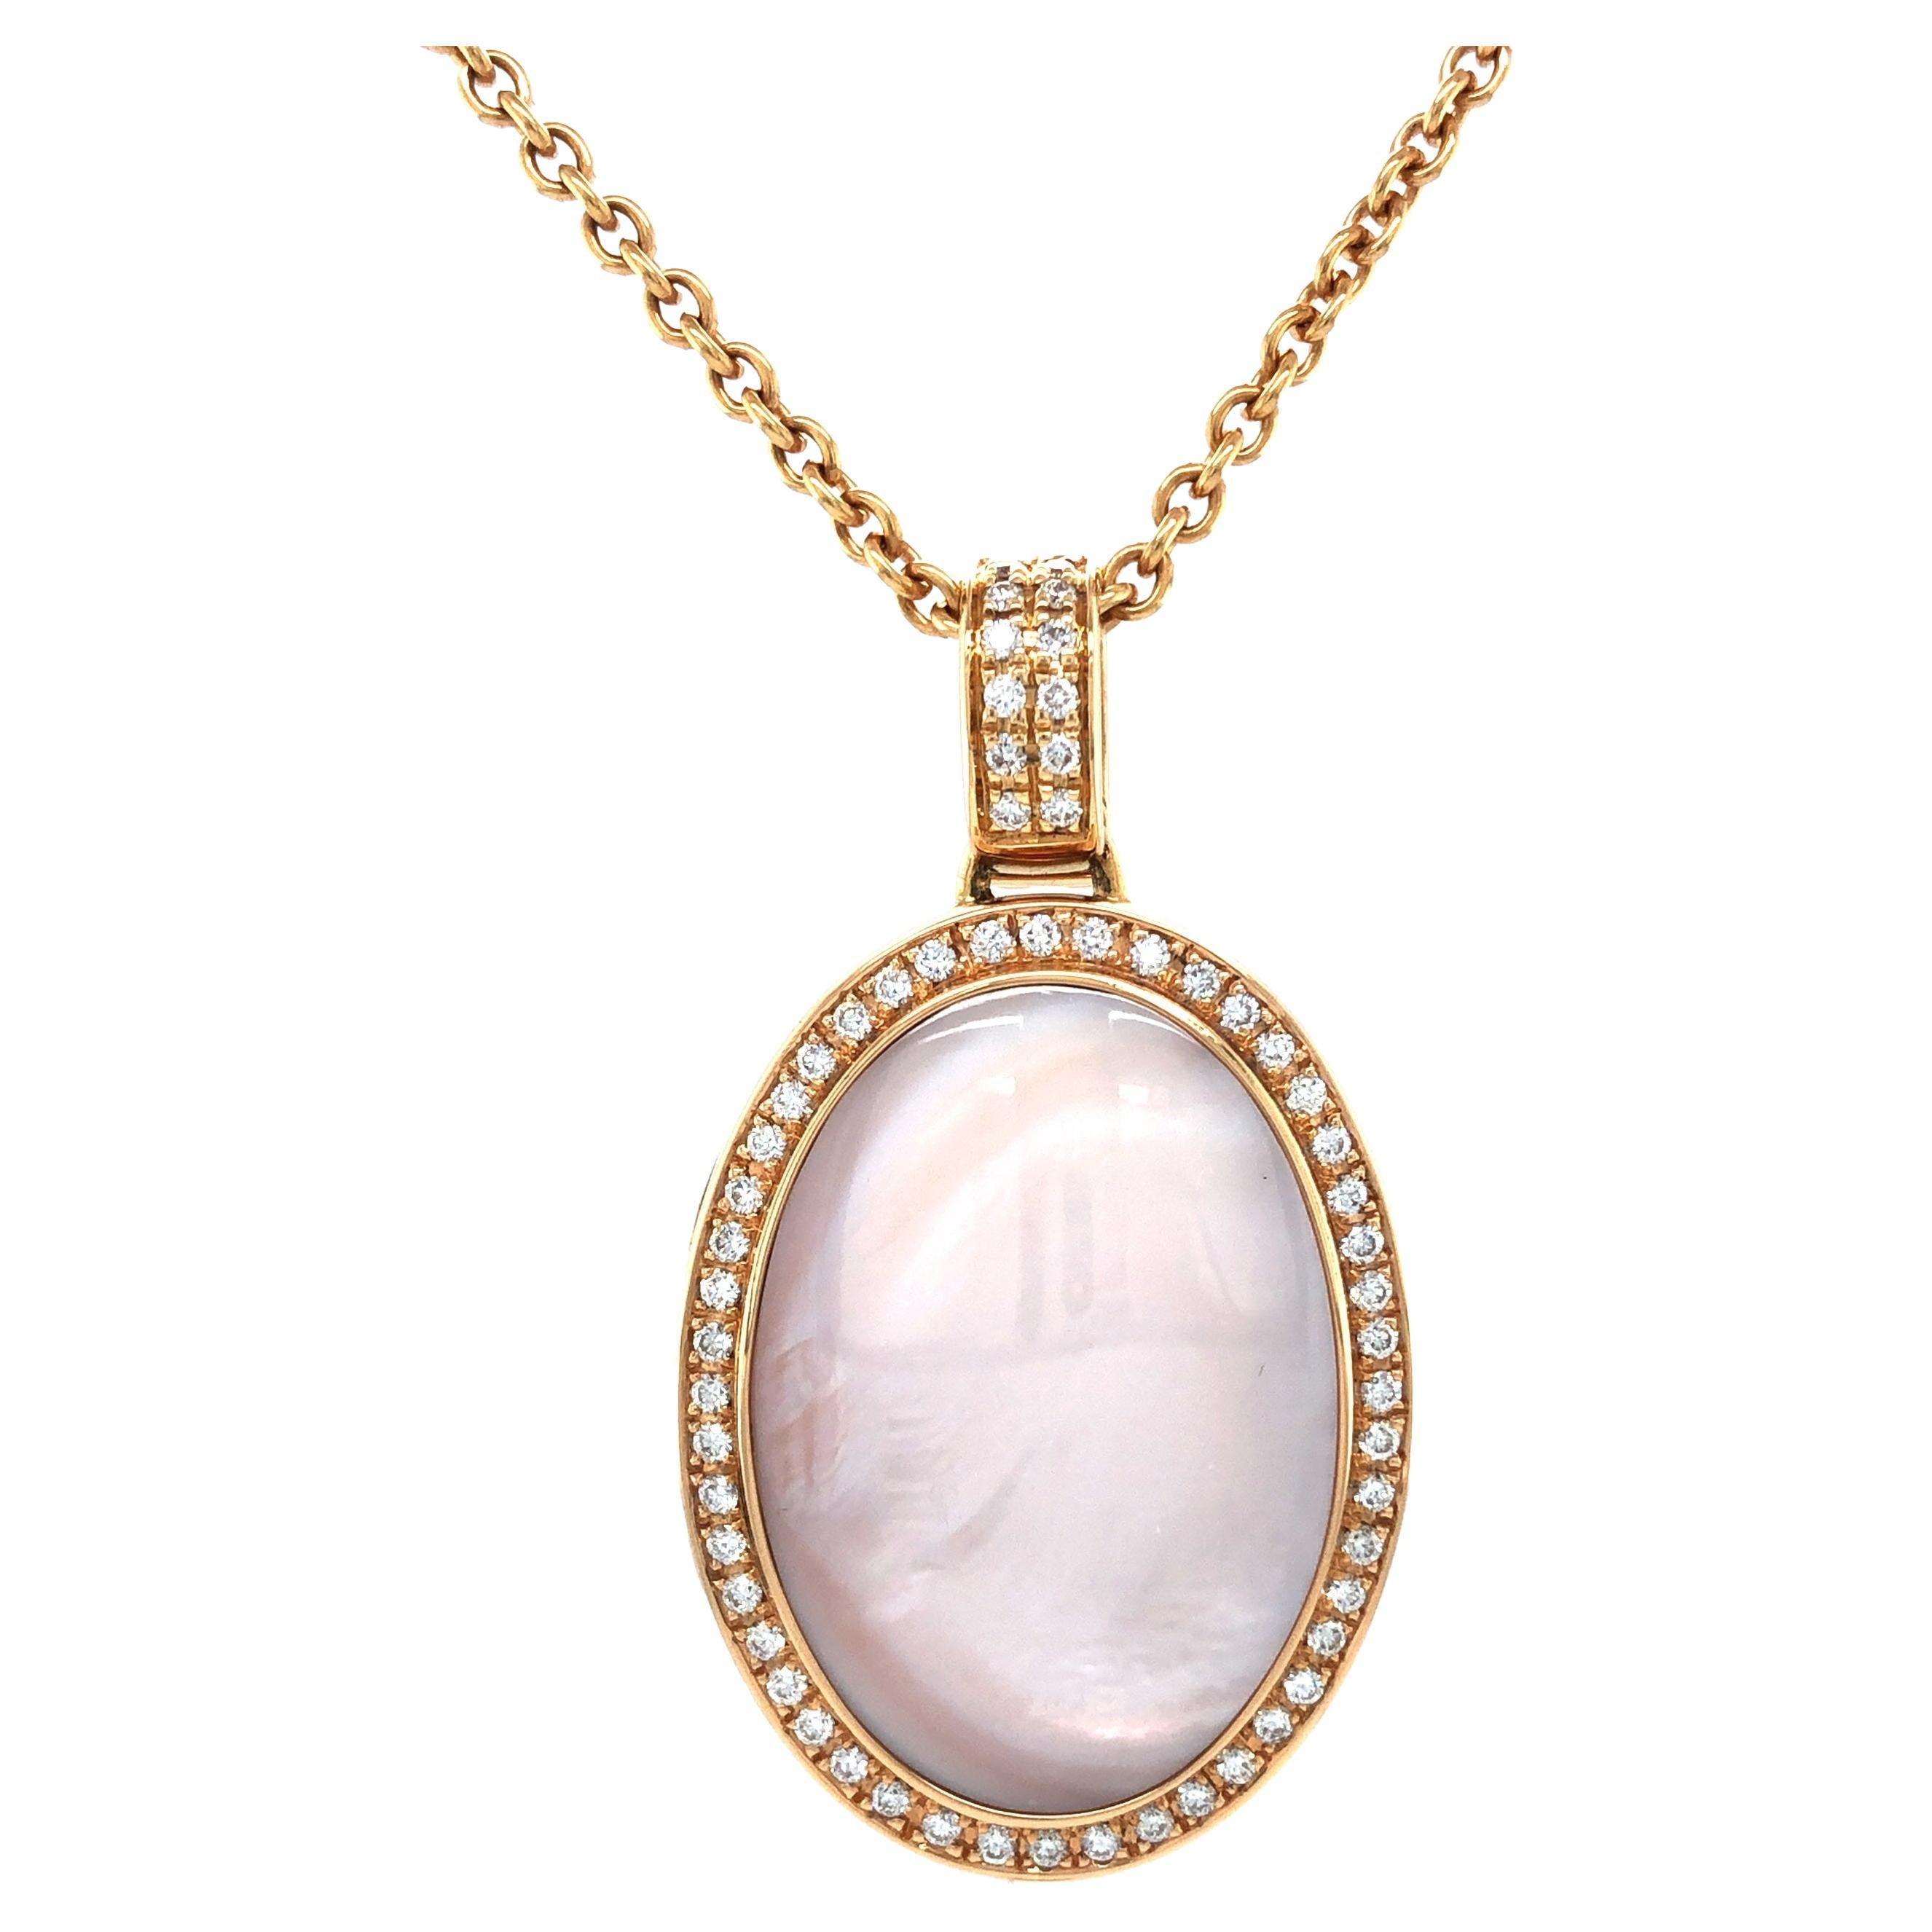 Pendant Locket Necklace 18k Yellow Gold 60 Diamonds 0.60 ct H VS Cut Pearl Pink For Sale